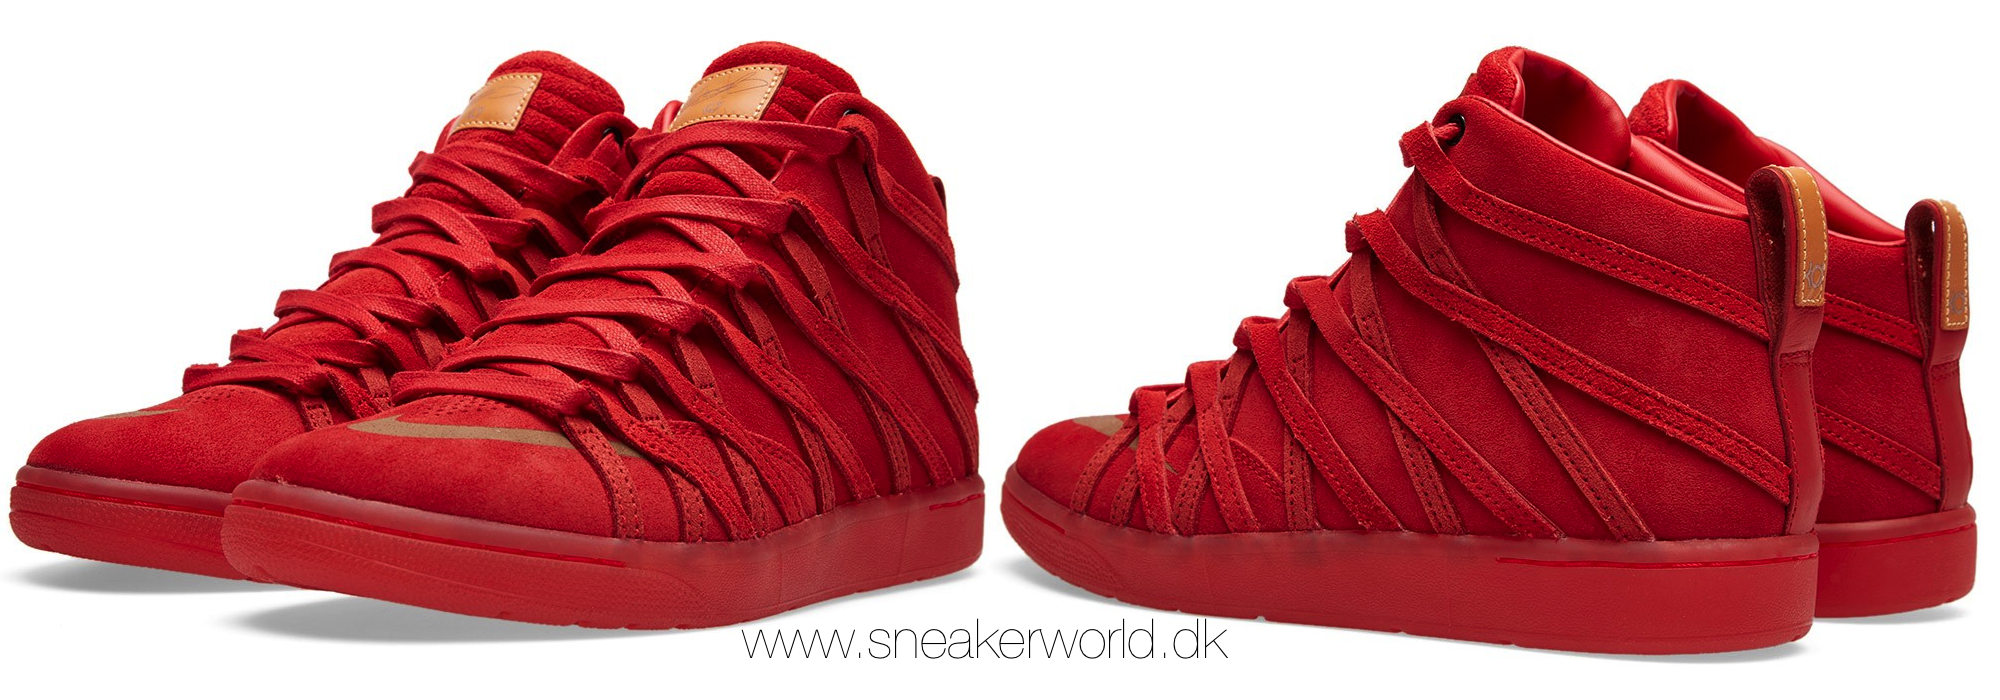 Nike KD VII Lifestyle Challenge Red